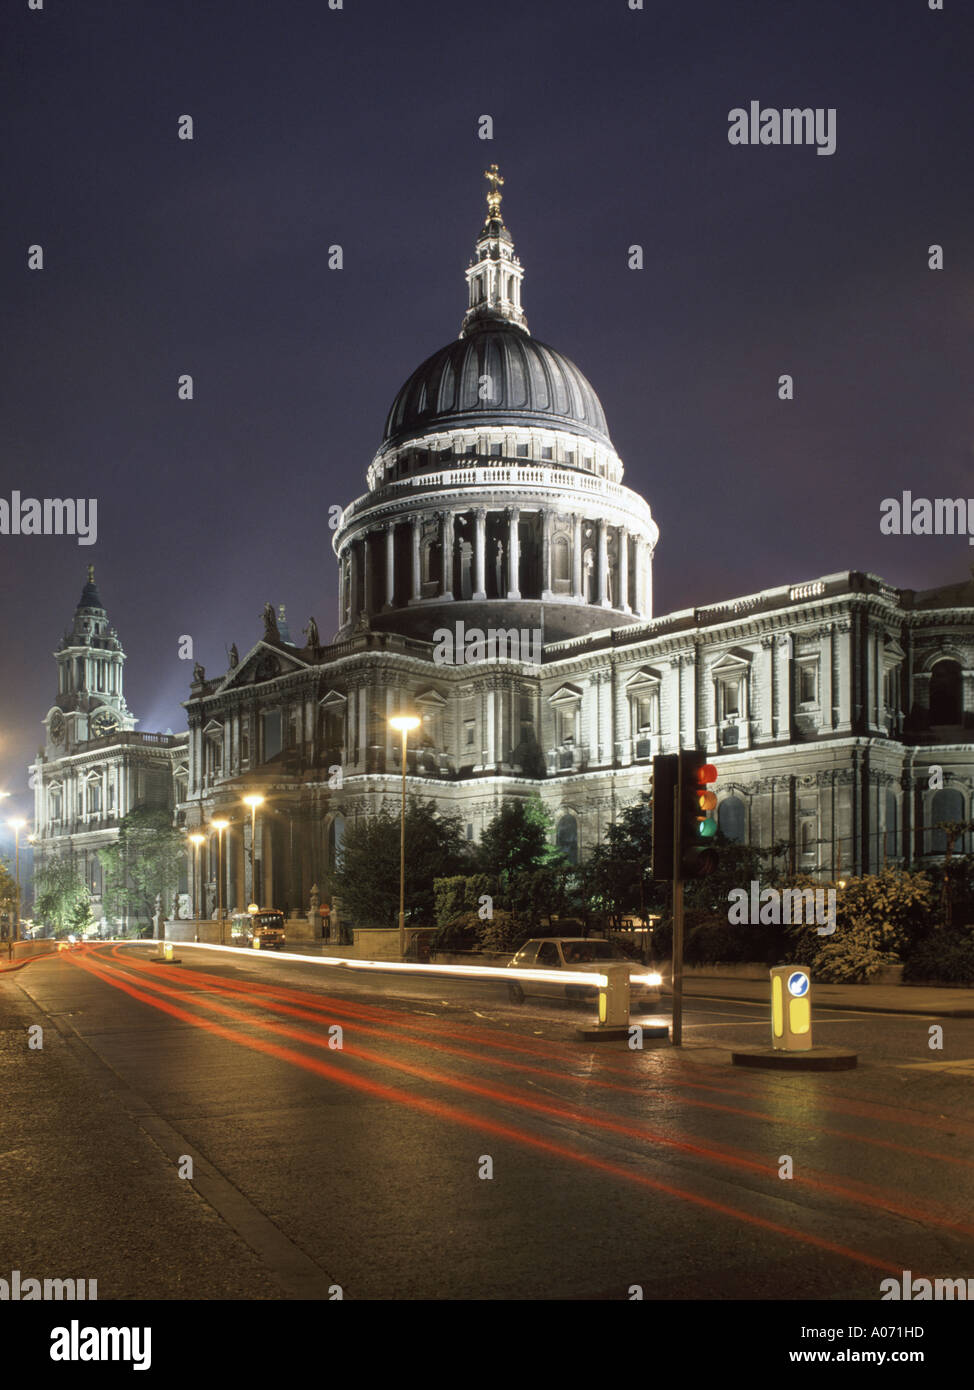 Night street scene City of London traffic trails & floodlights on Sir Christopher Wren iconic historical dome St Pauls cathedral building England UK Stock Photo